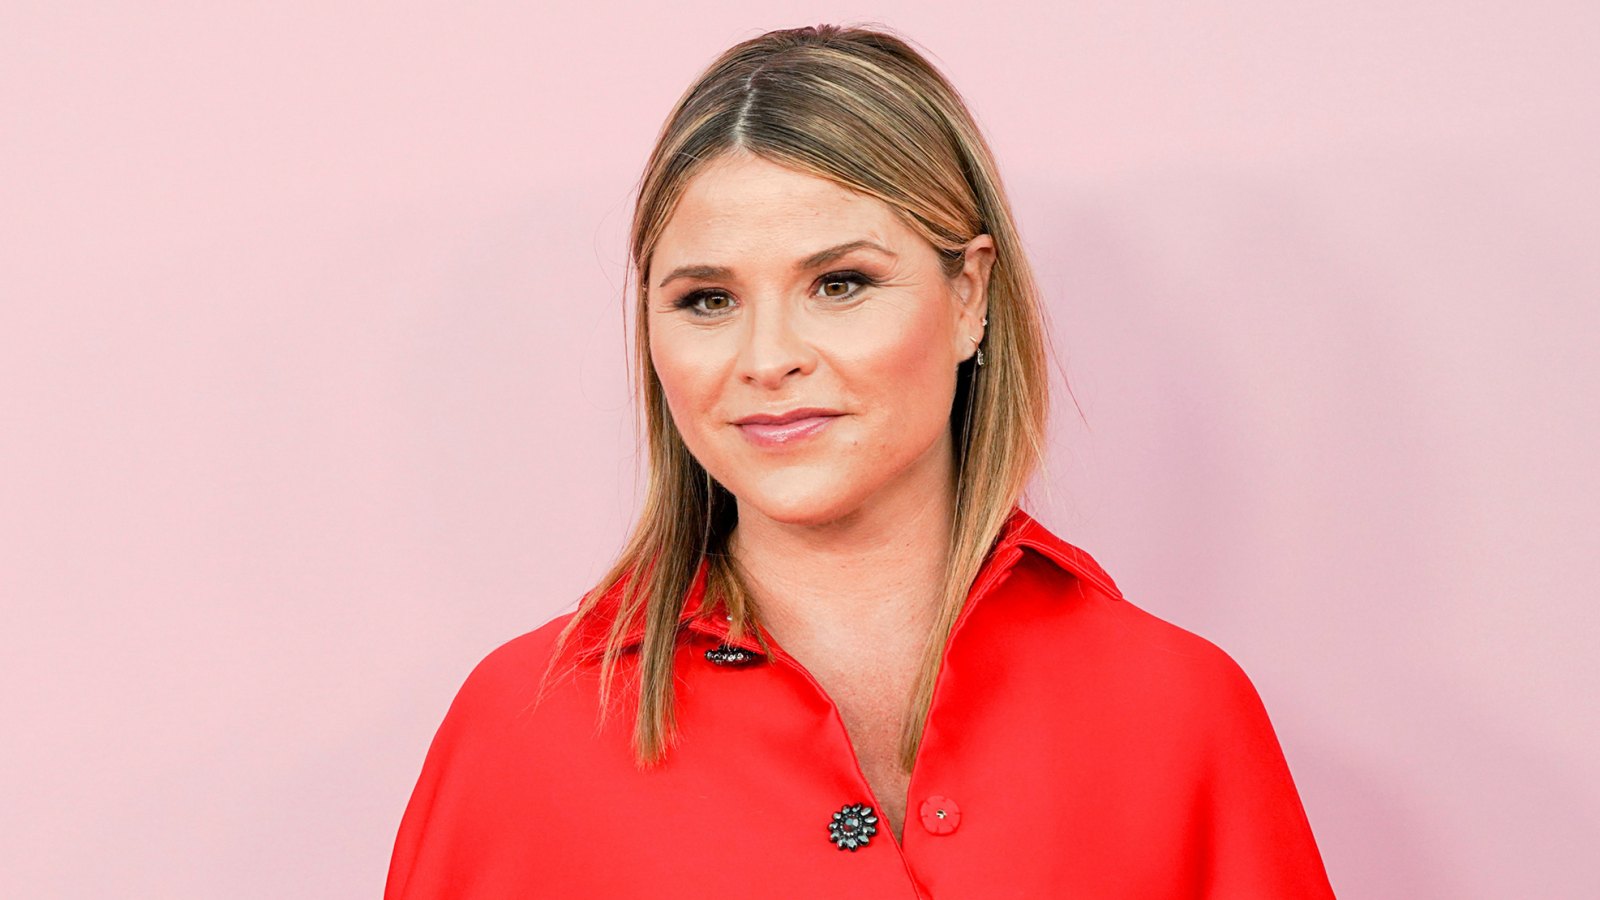 Jenna Bush Hager Reveals Her Middle School Boyfriend Broke Up with Her After Seeing Her ‘In a Bathing Suit’